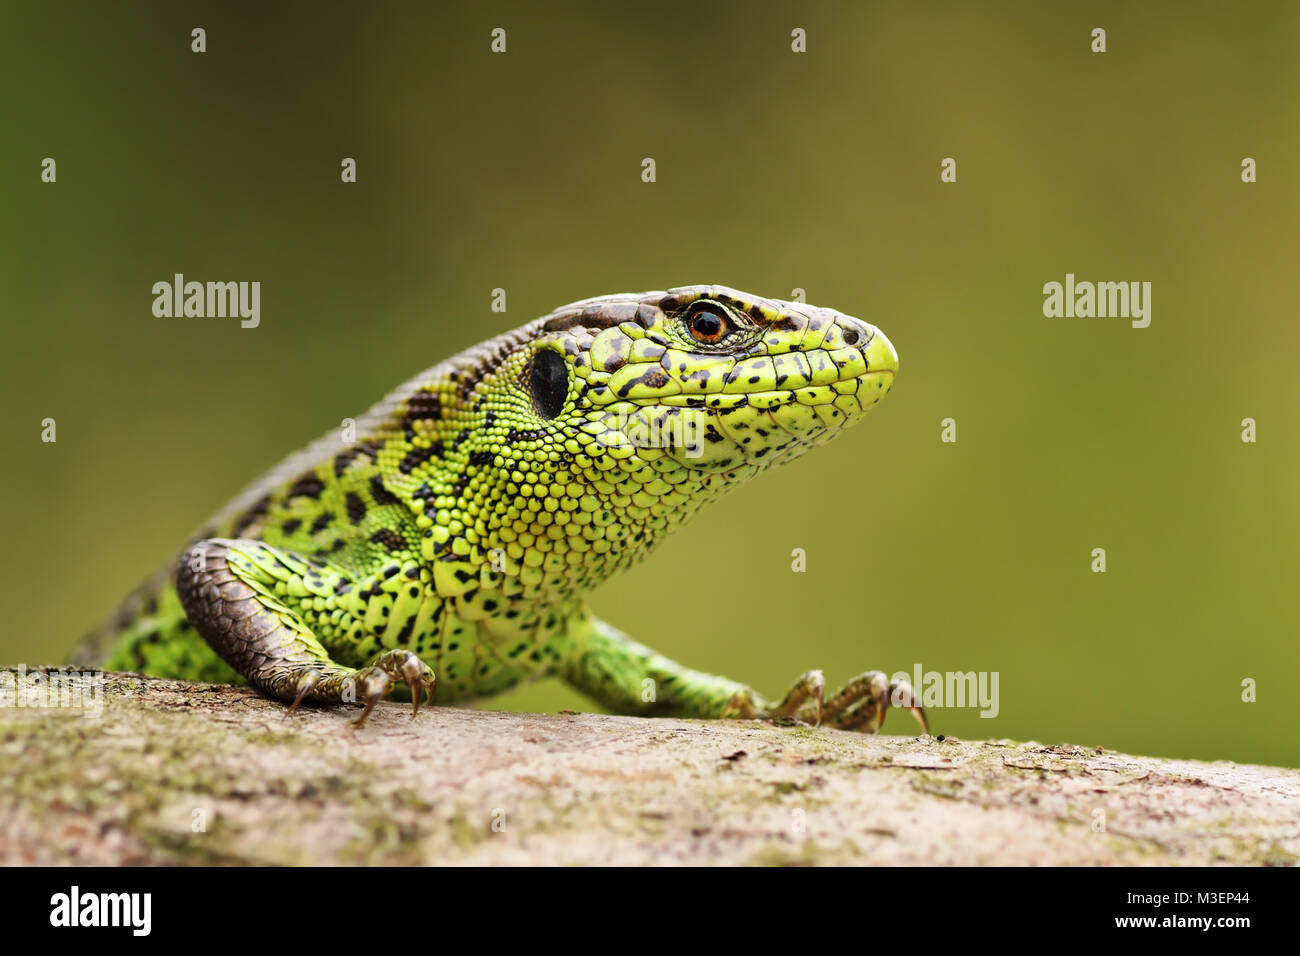 portrait of curious sand lizard on a wooden stump ( Lacerta agilis ); wild reptile basking in natural habitat Stock Photo